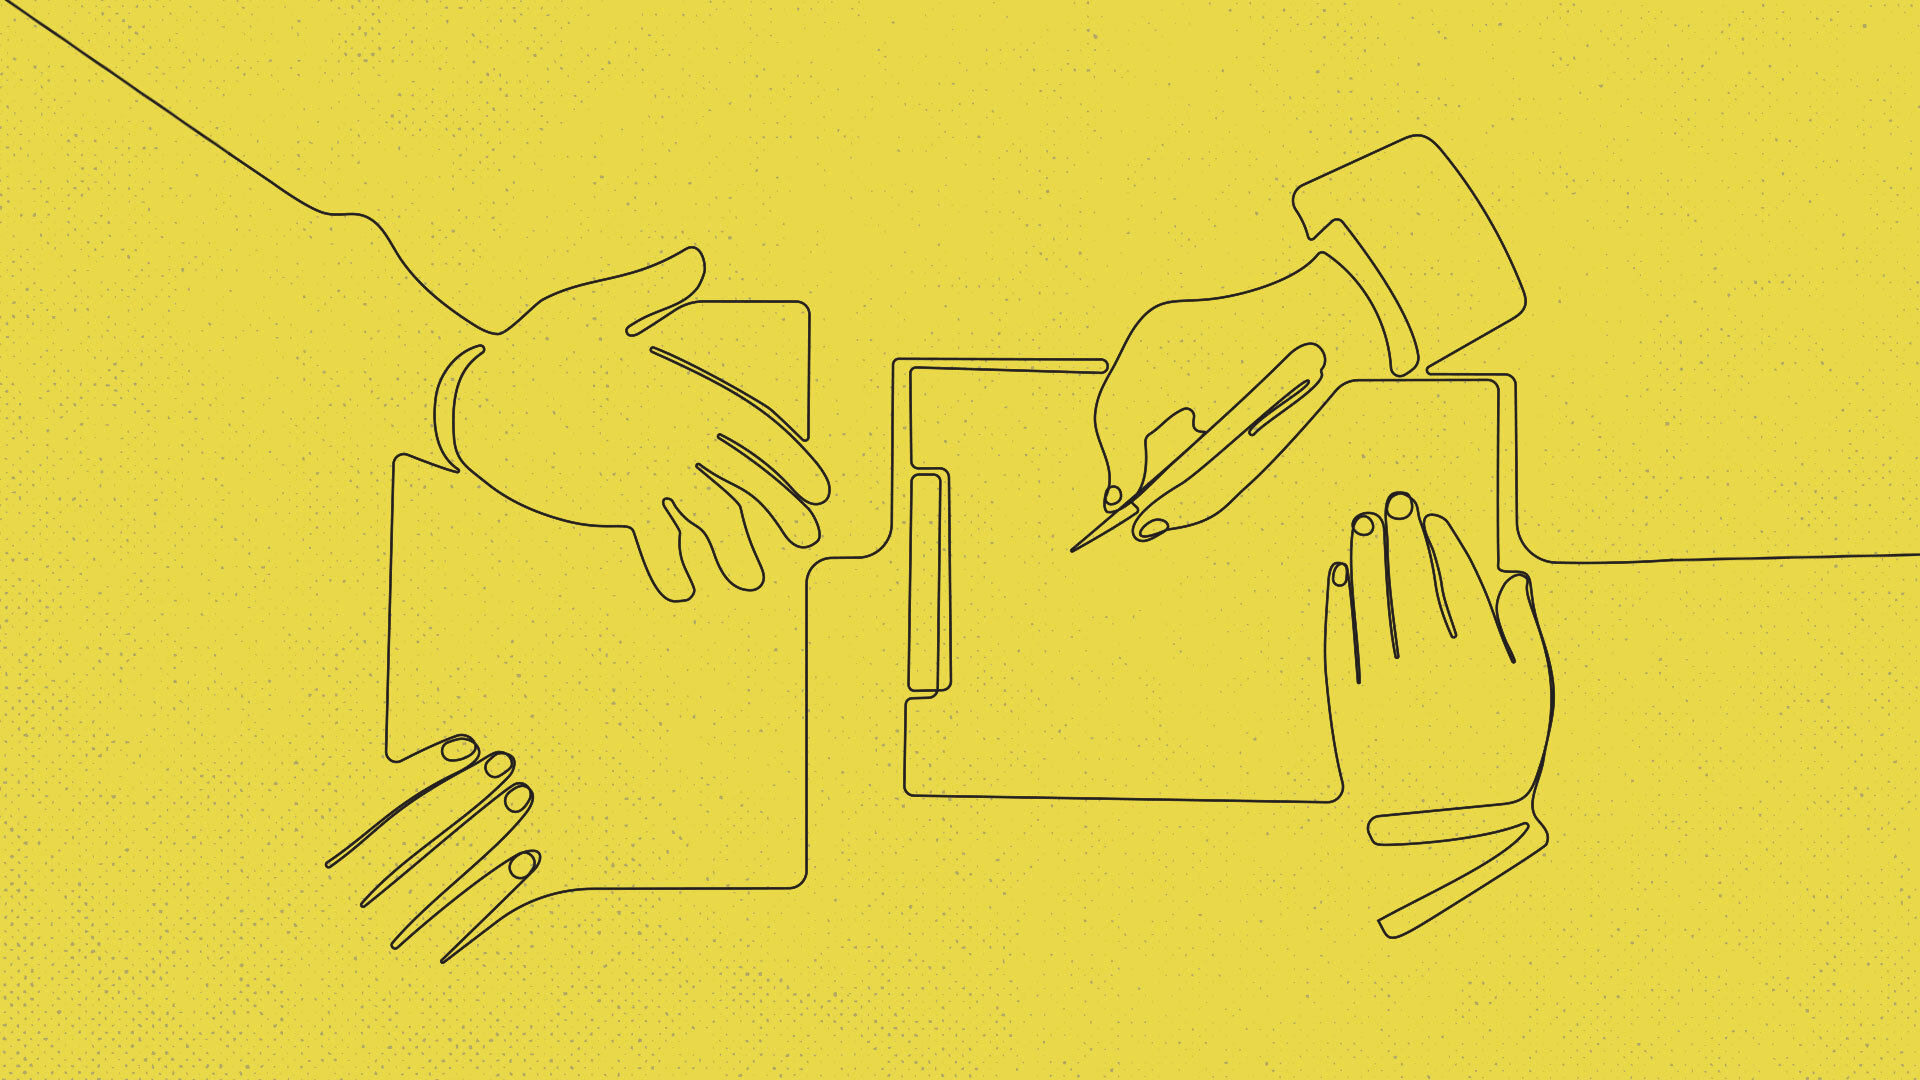 An illustration of four hands representing job negotiation, with black lines on a yellow background